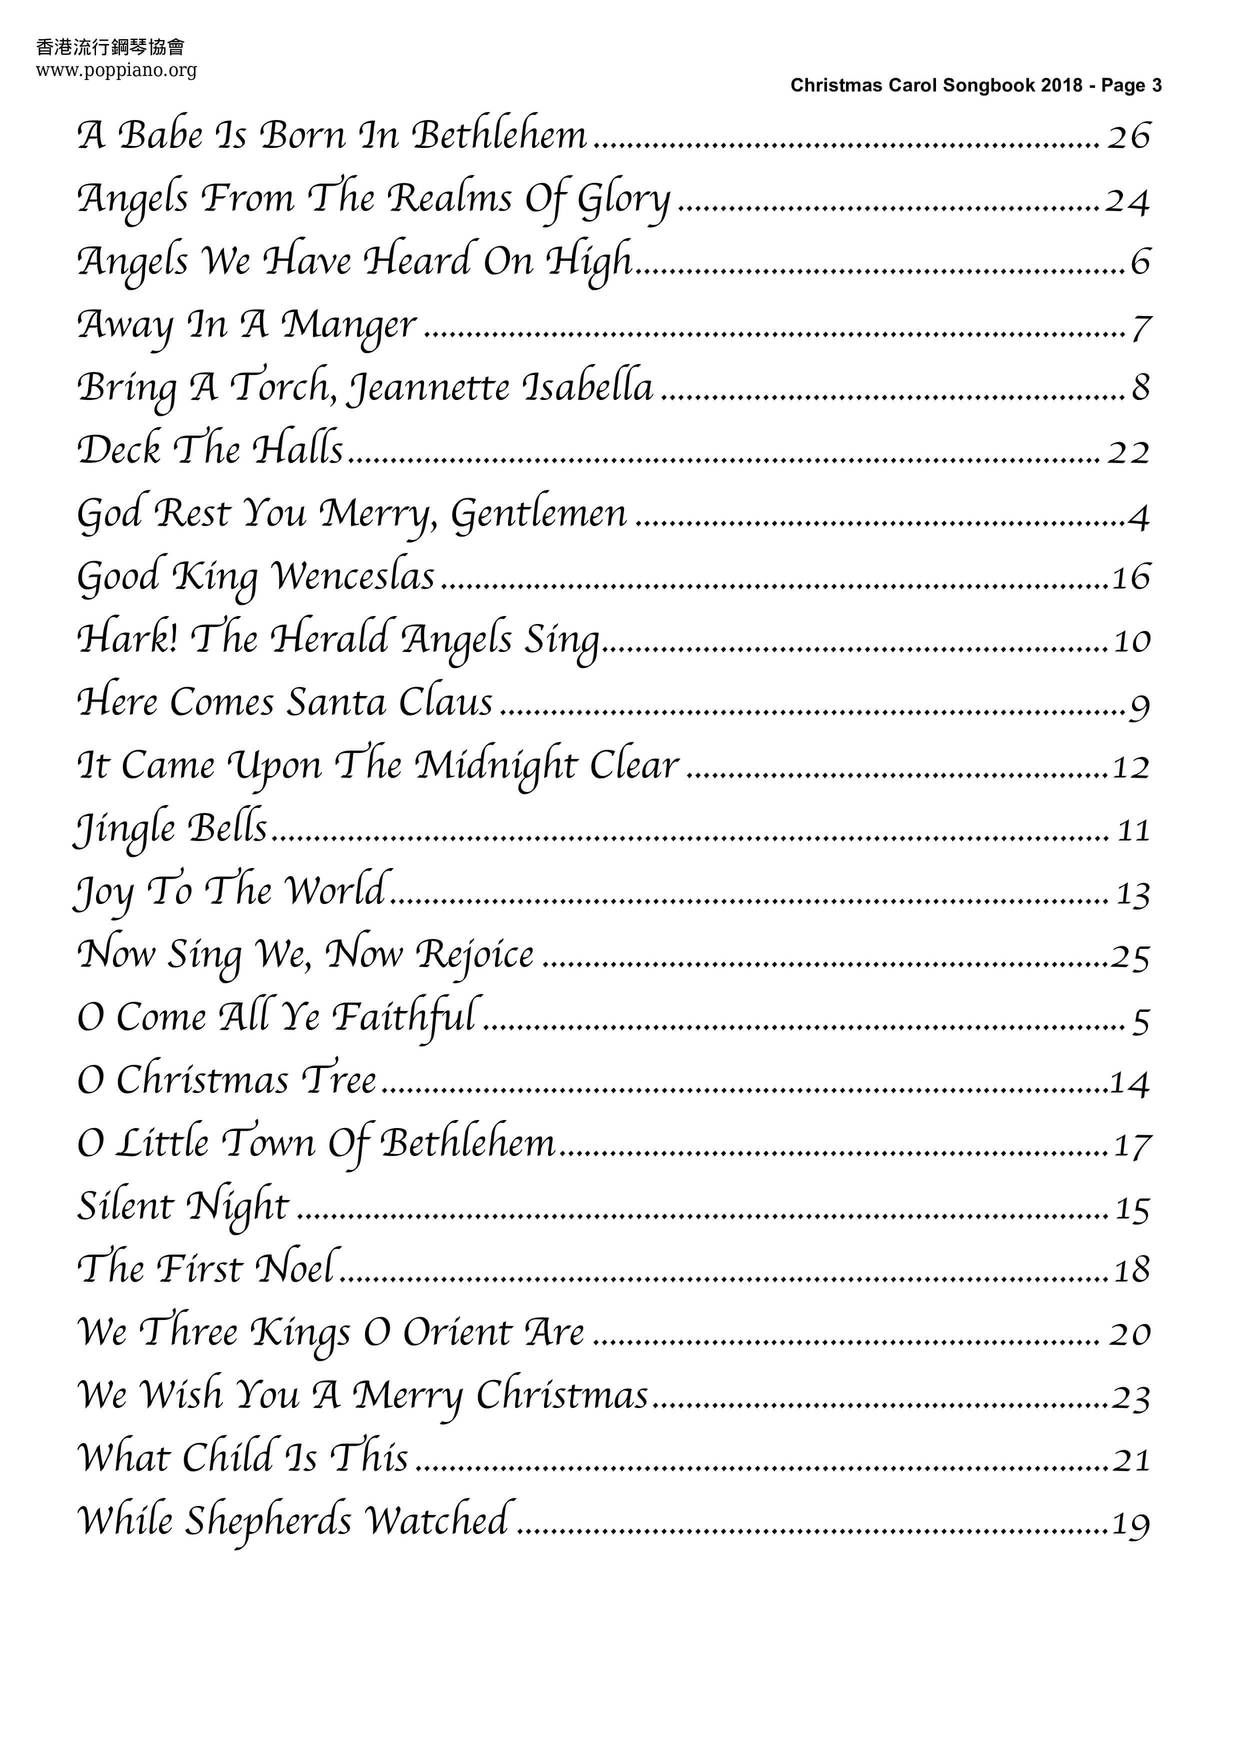 Christmas Songbook 28 Pages Score